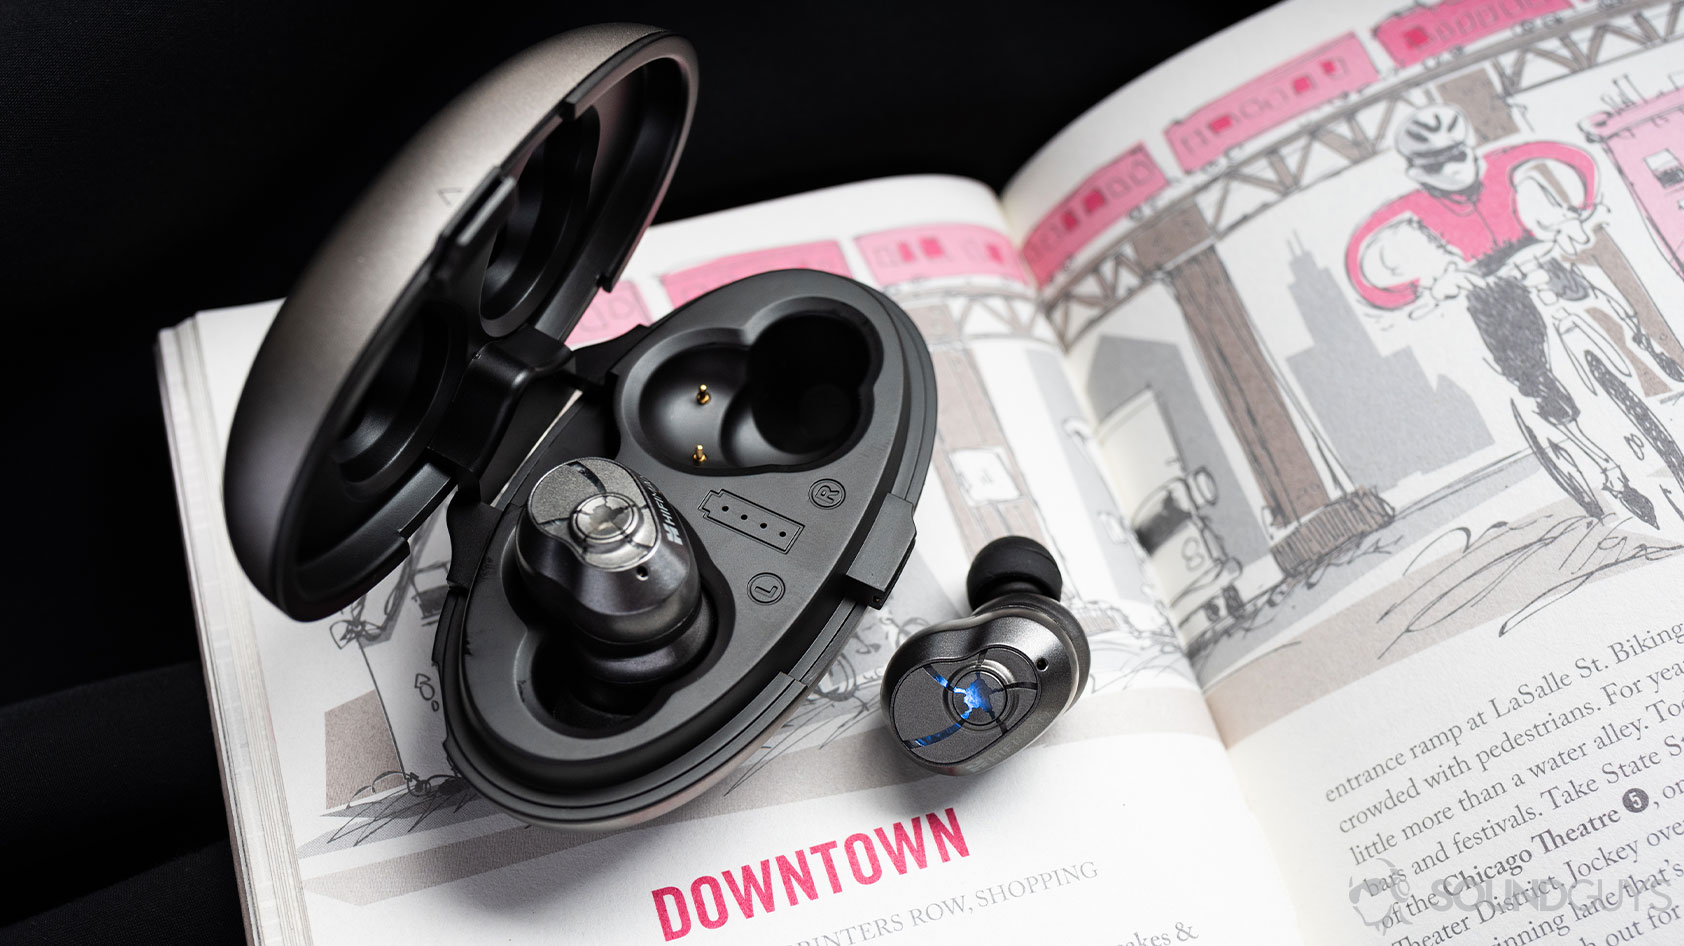 A photo of the HiFiMan TWS600 true wireless earbuds with one earbud in and the other out of the oblong open charging case on top of a book.